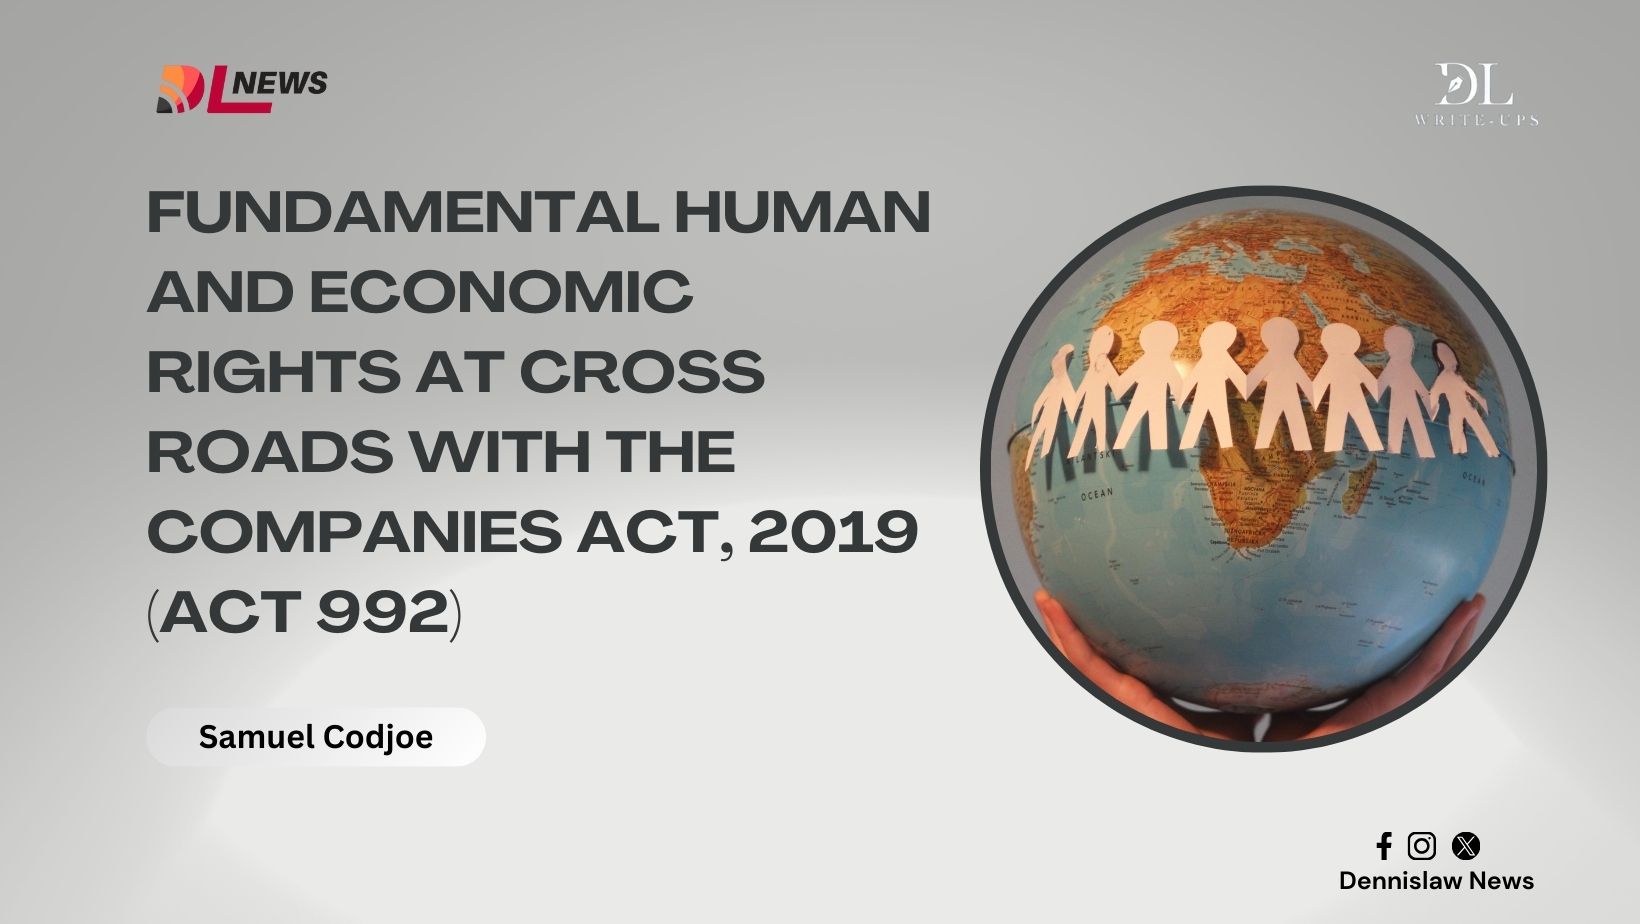 Fundamental Human and Economic Rights at Crossroads with the Companies Act, 2019 (Act 992)